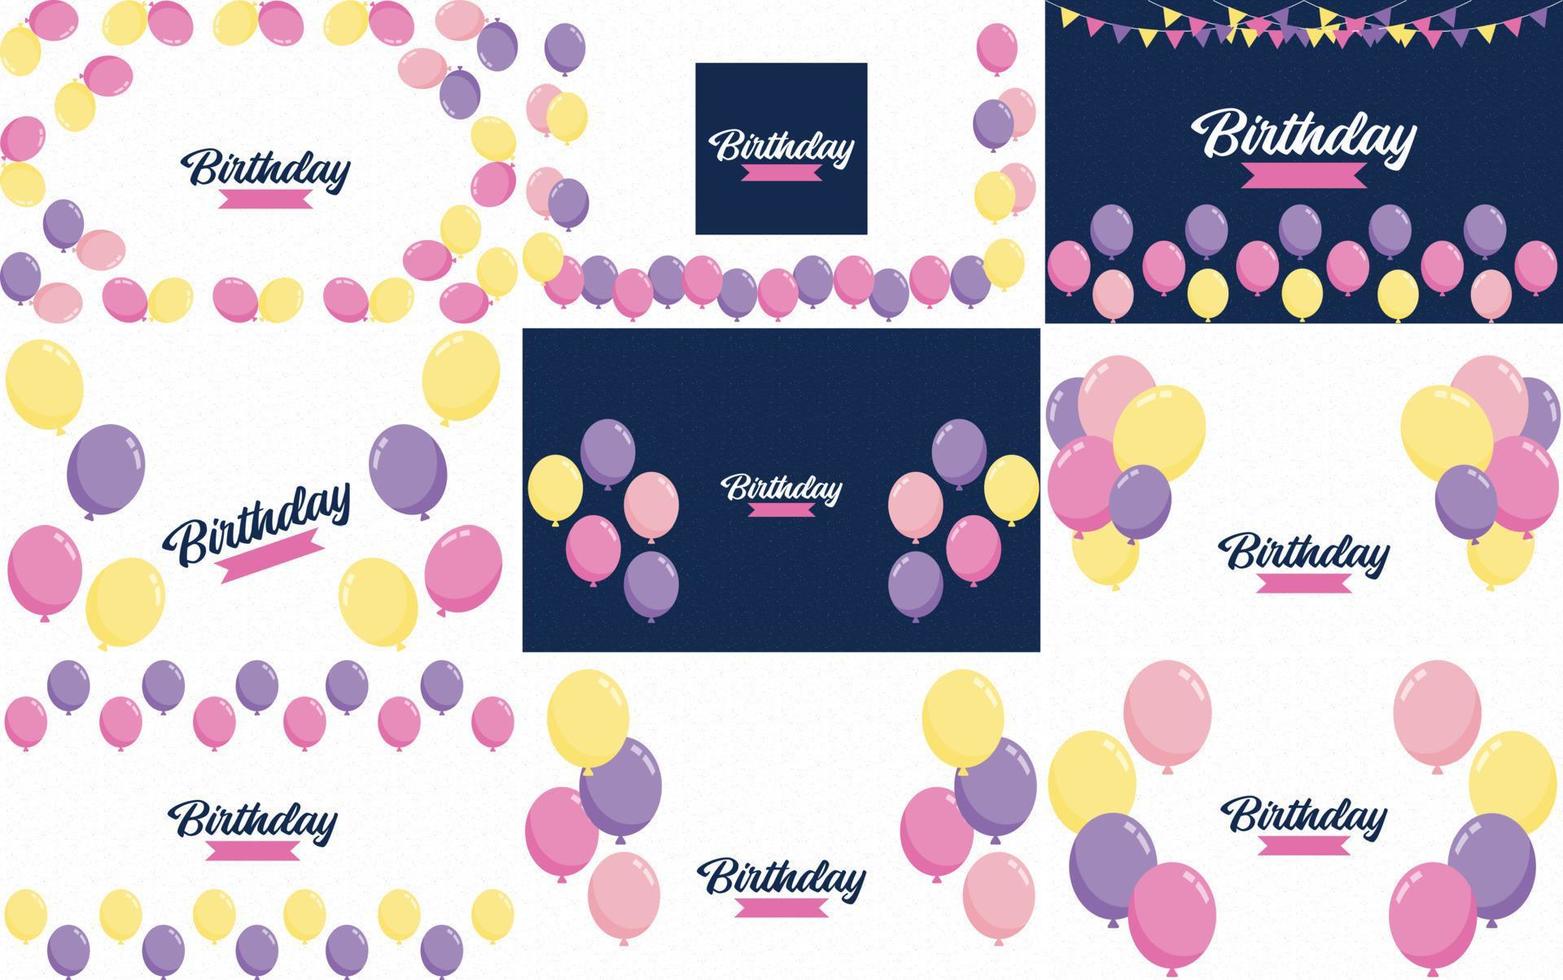 Elegant balloons and birthday text. Happy Birthday celebration card banner template vector